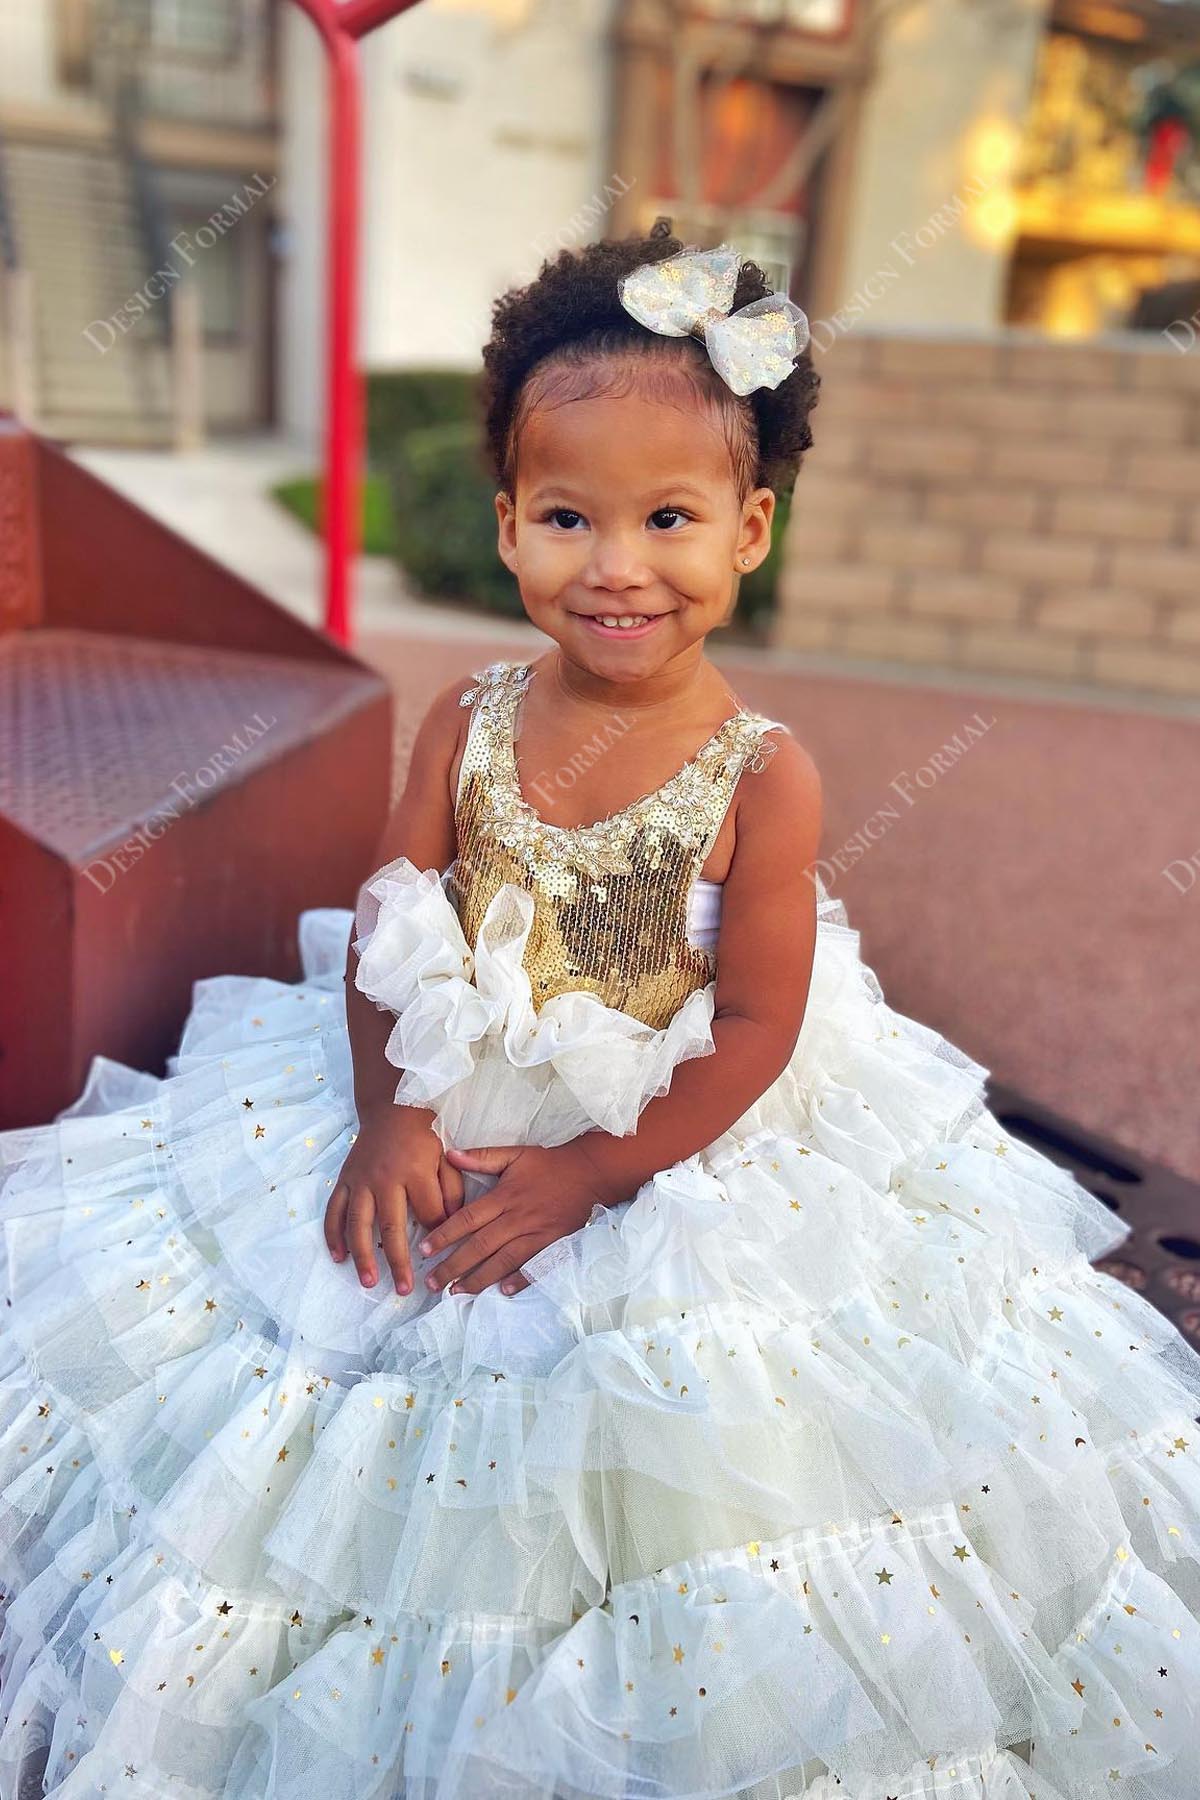 Sparkly Gold Sequin Ankle Length Ball Gown Flower Girl Dress